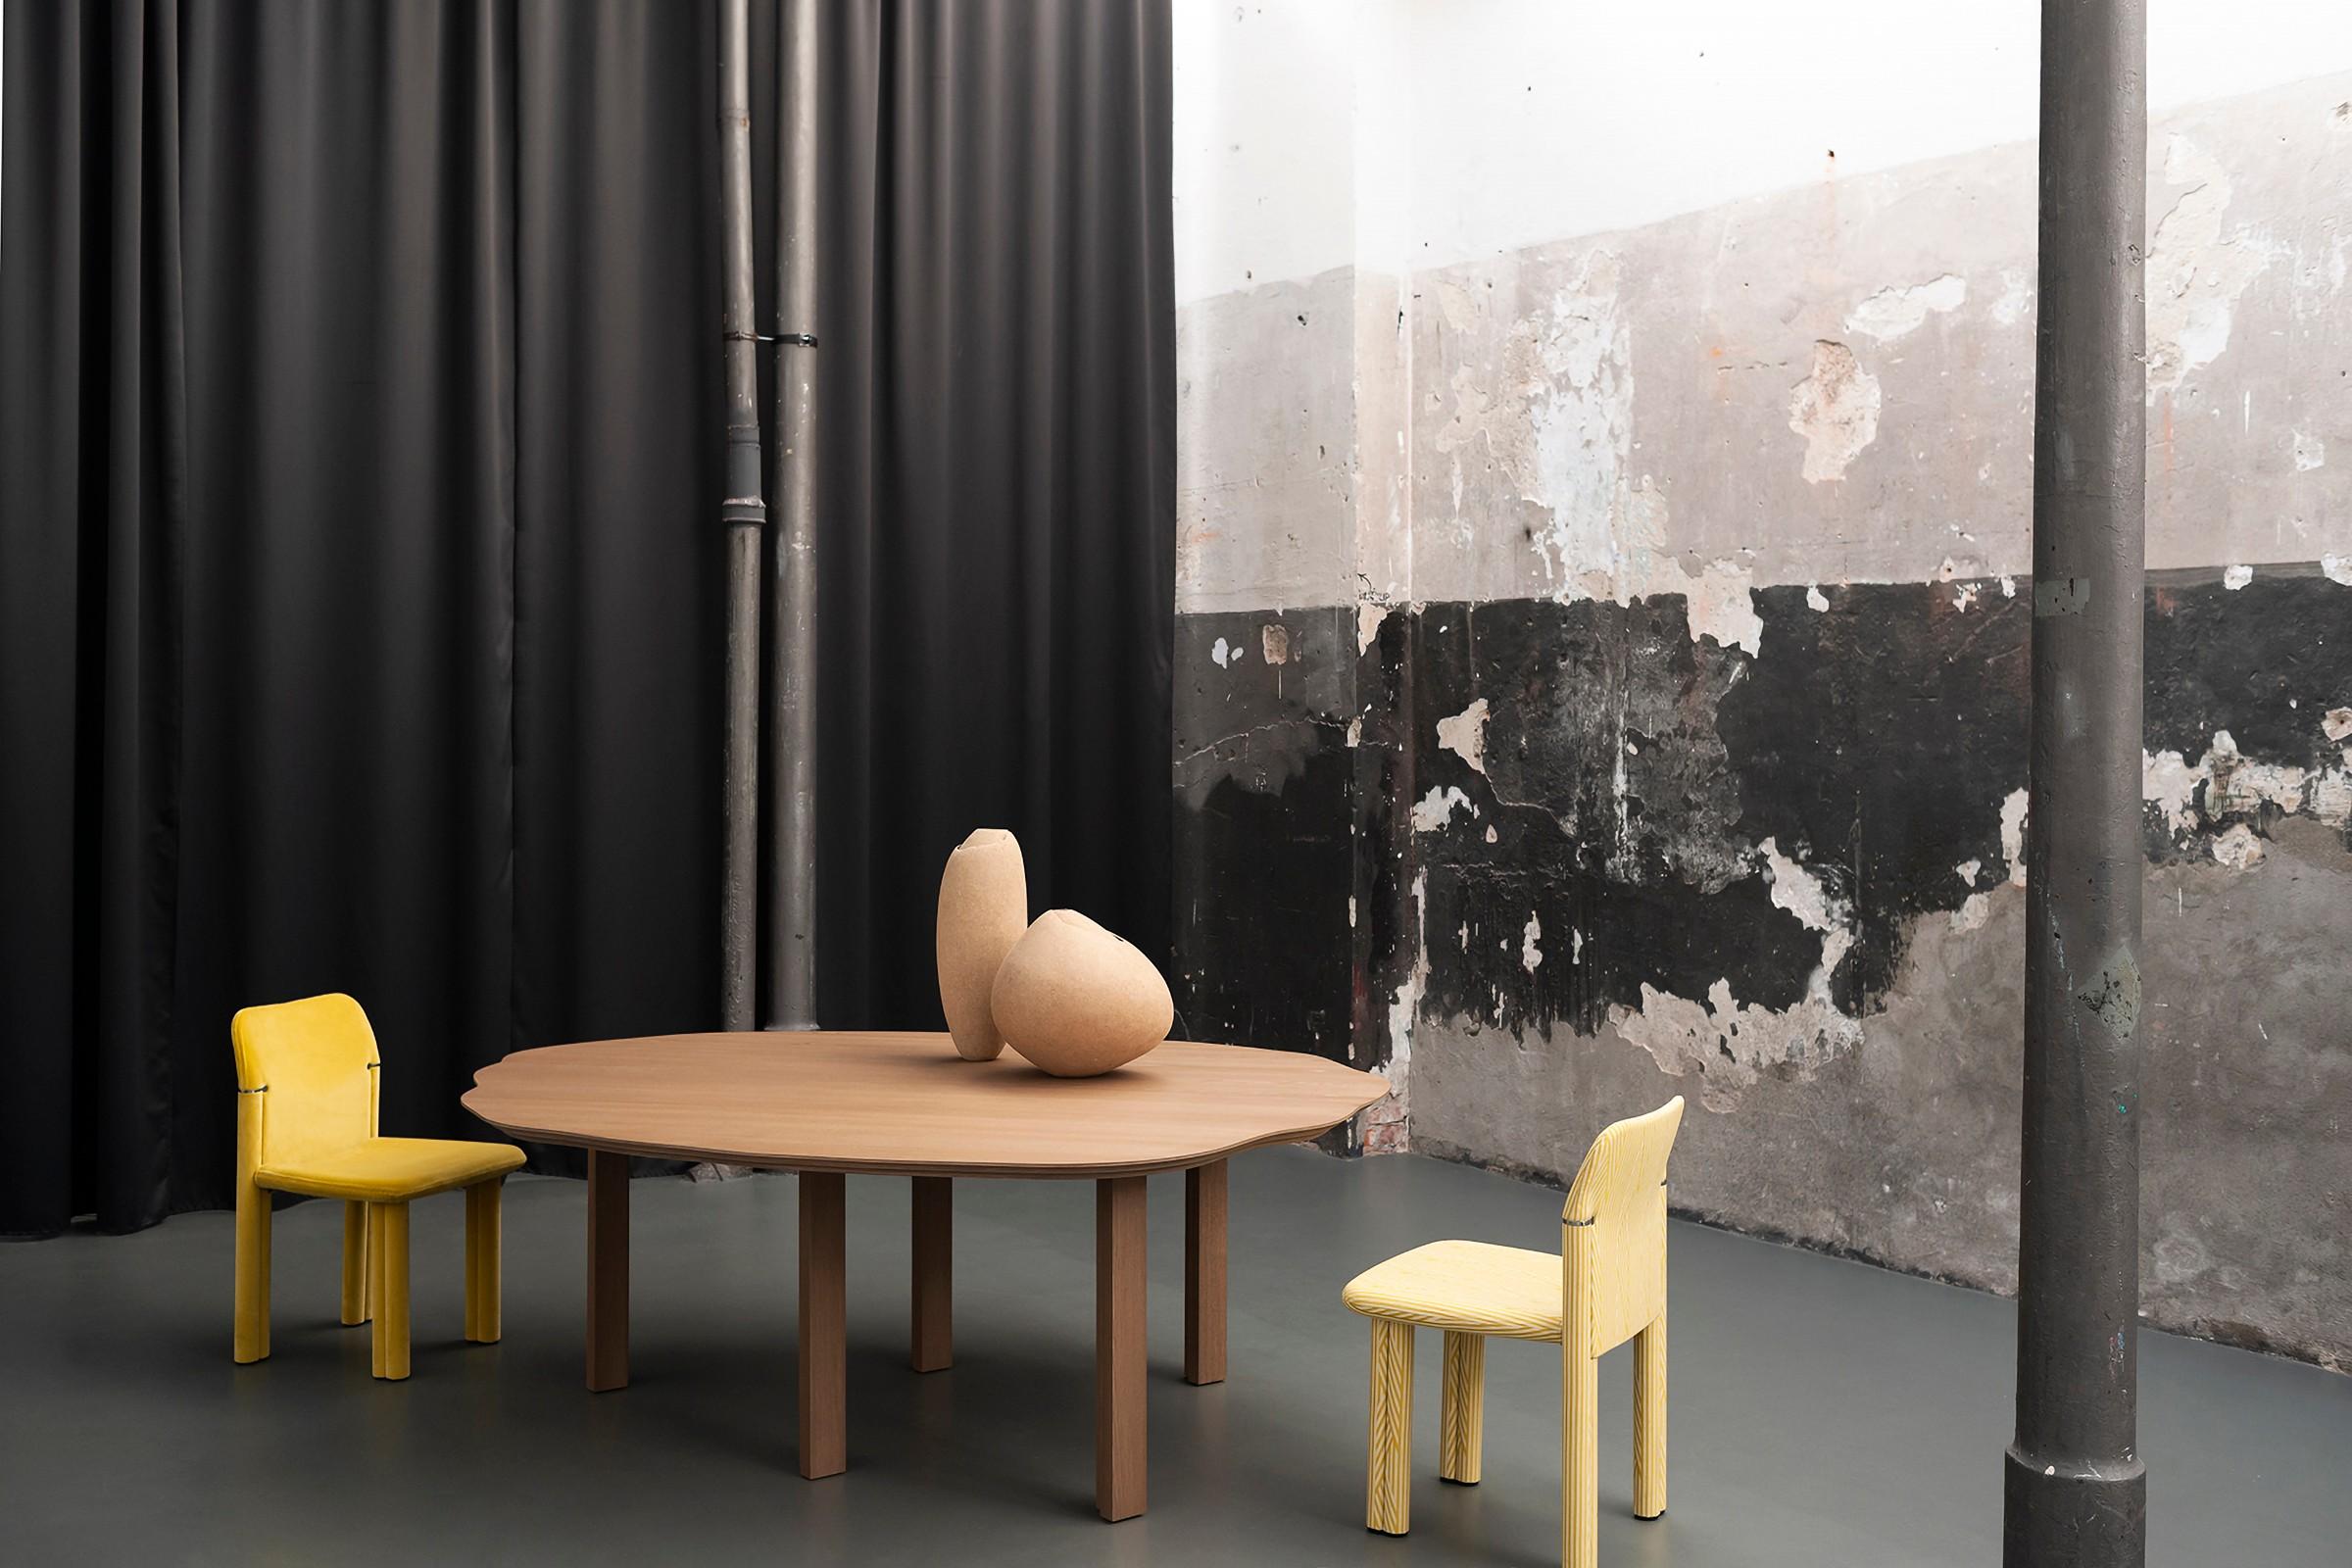 Like “Orpheus” – the marble table born from the creativity of Lorenzo Bini – Parker takes up the indefinite shape of detail of Cy Twombly’s work but finds its own identity in the finishes. Here solid wood becomes the protagonist, suggesting the